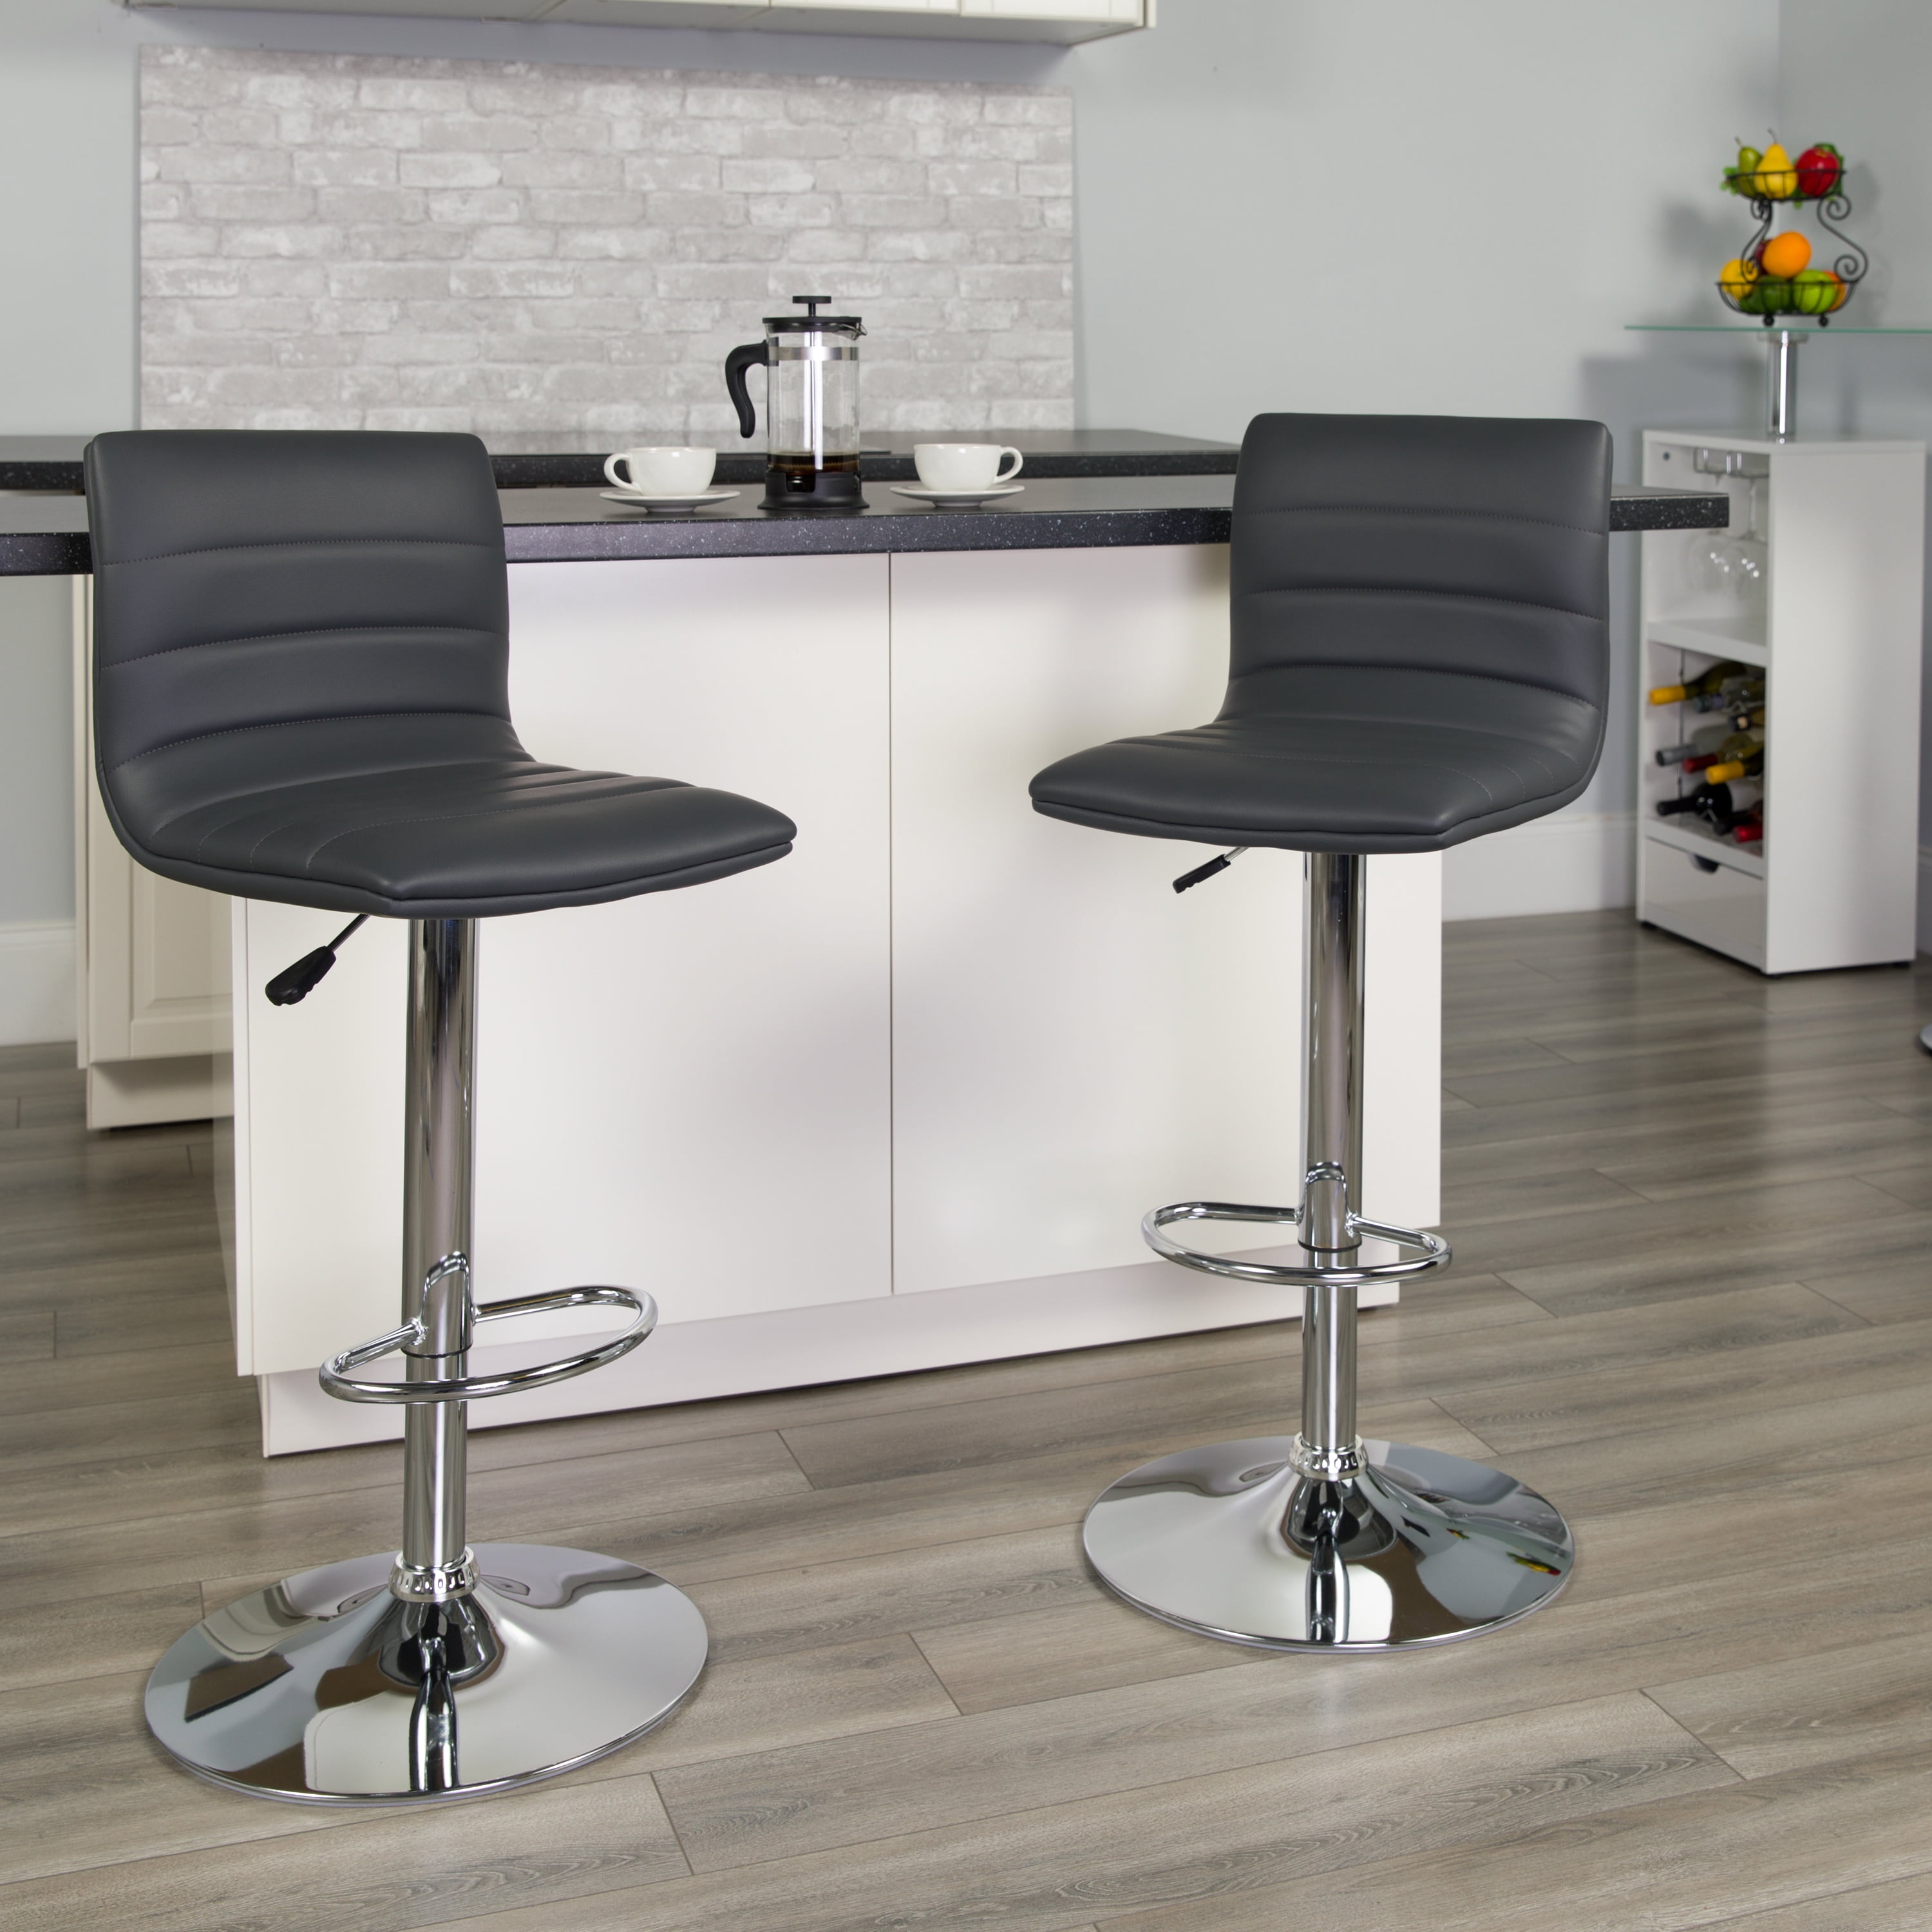 GREY BACKED BREAKFAST BAR STOOL UPHOLSTERED IN CROSS STITCH FAUX LEATHER 